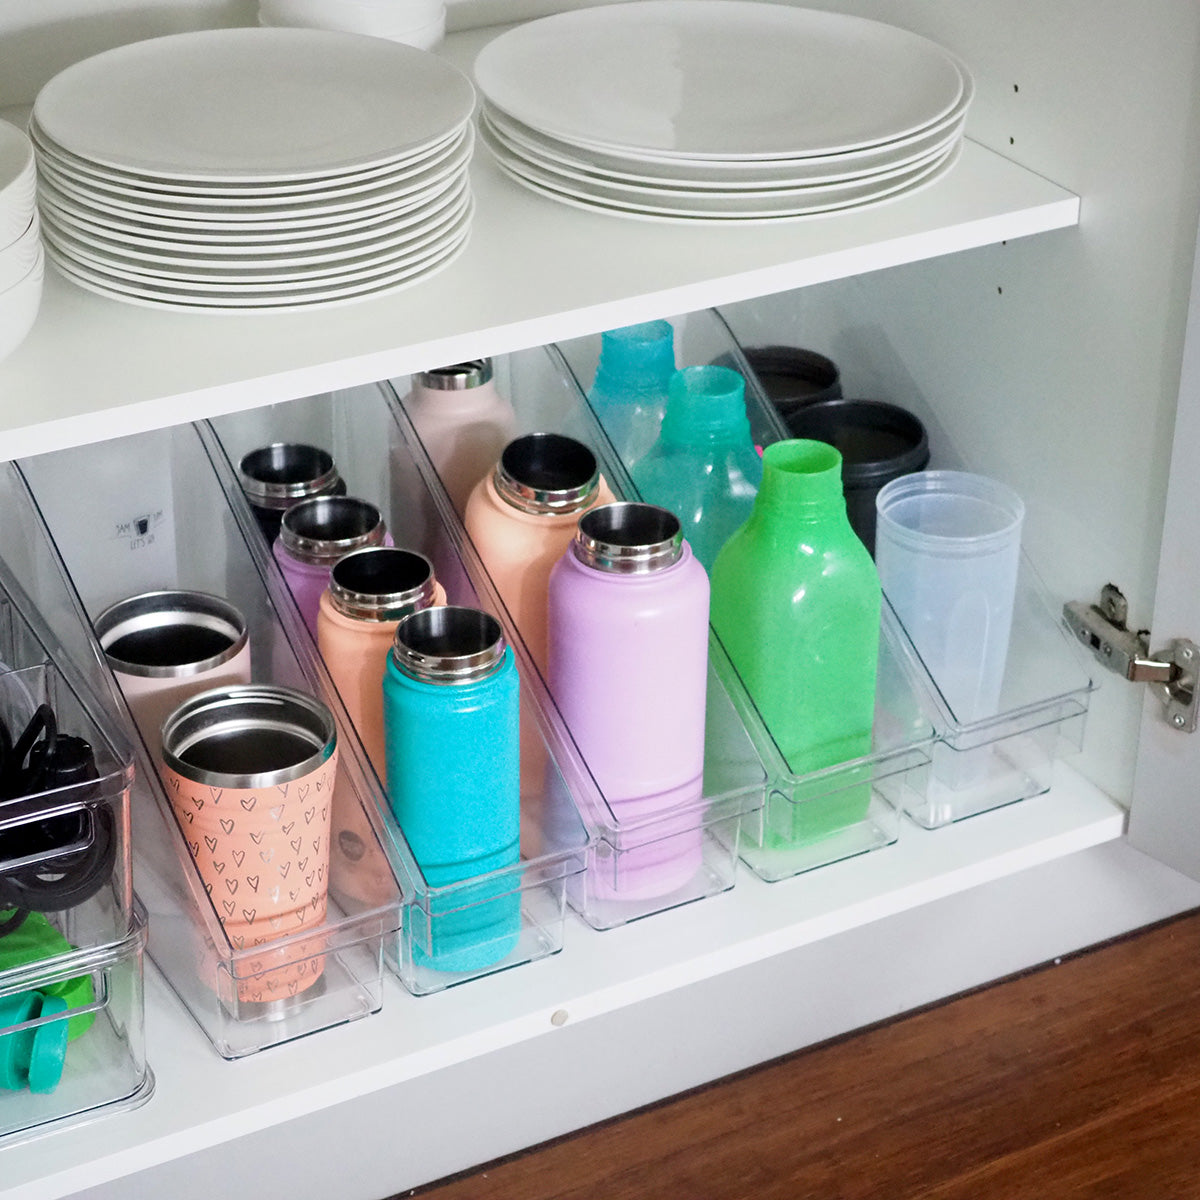 Kitchen storage idea for cups and drink bottles cupboard - The Organised  Housewife